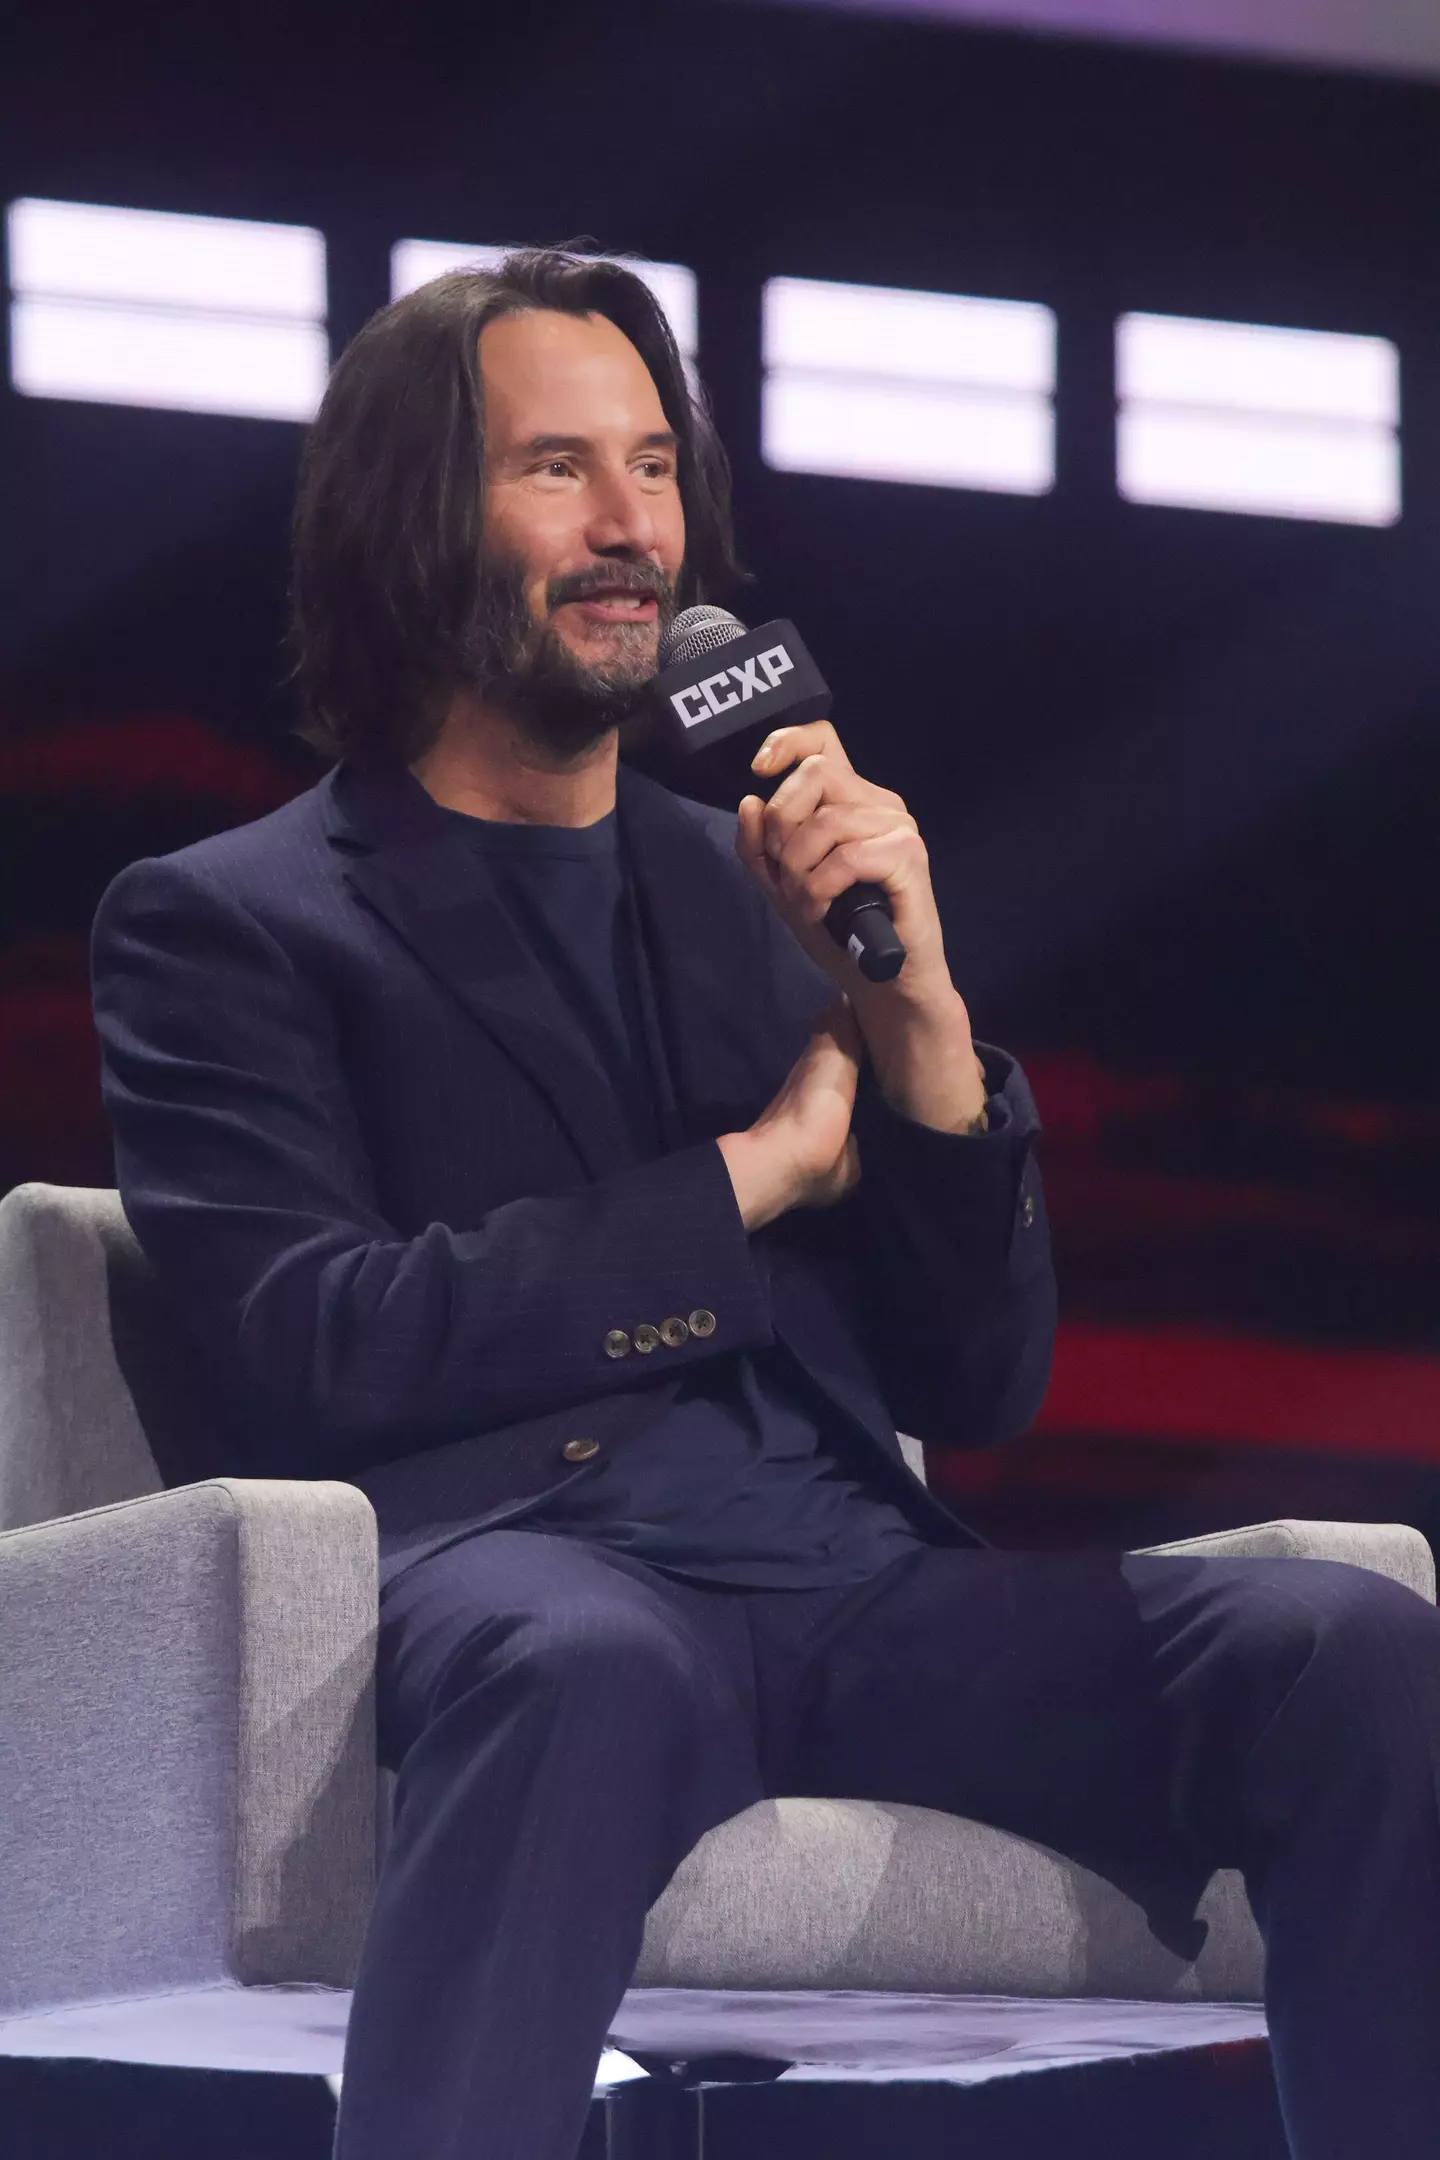 Cast Keanu in The Last Of Us and 'the infected' disappear.